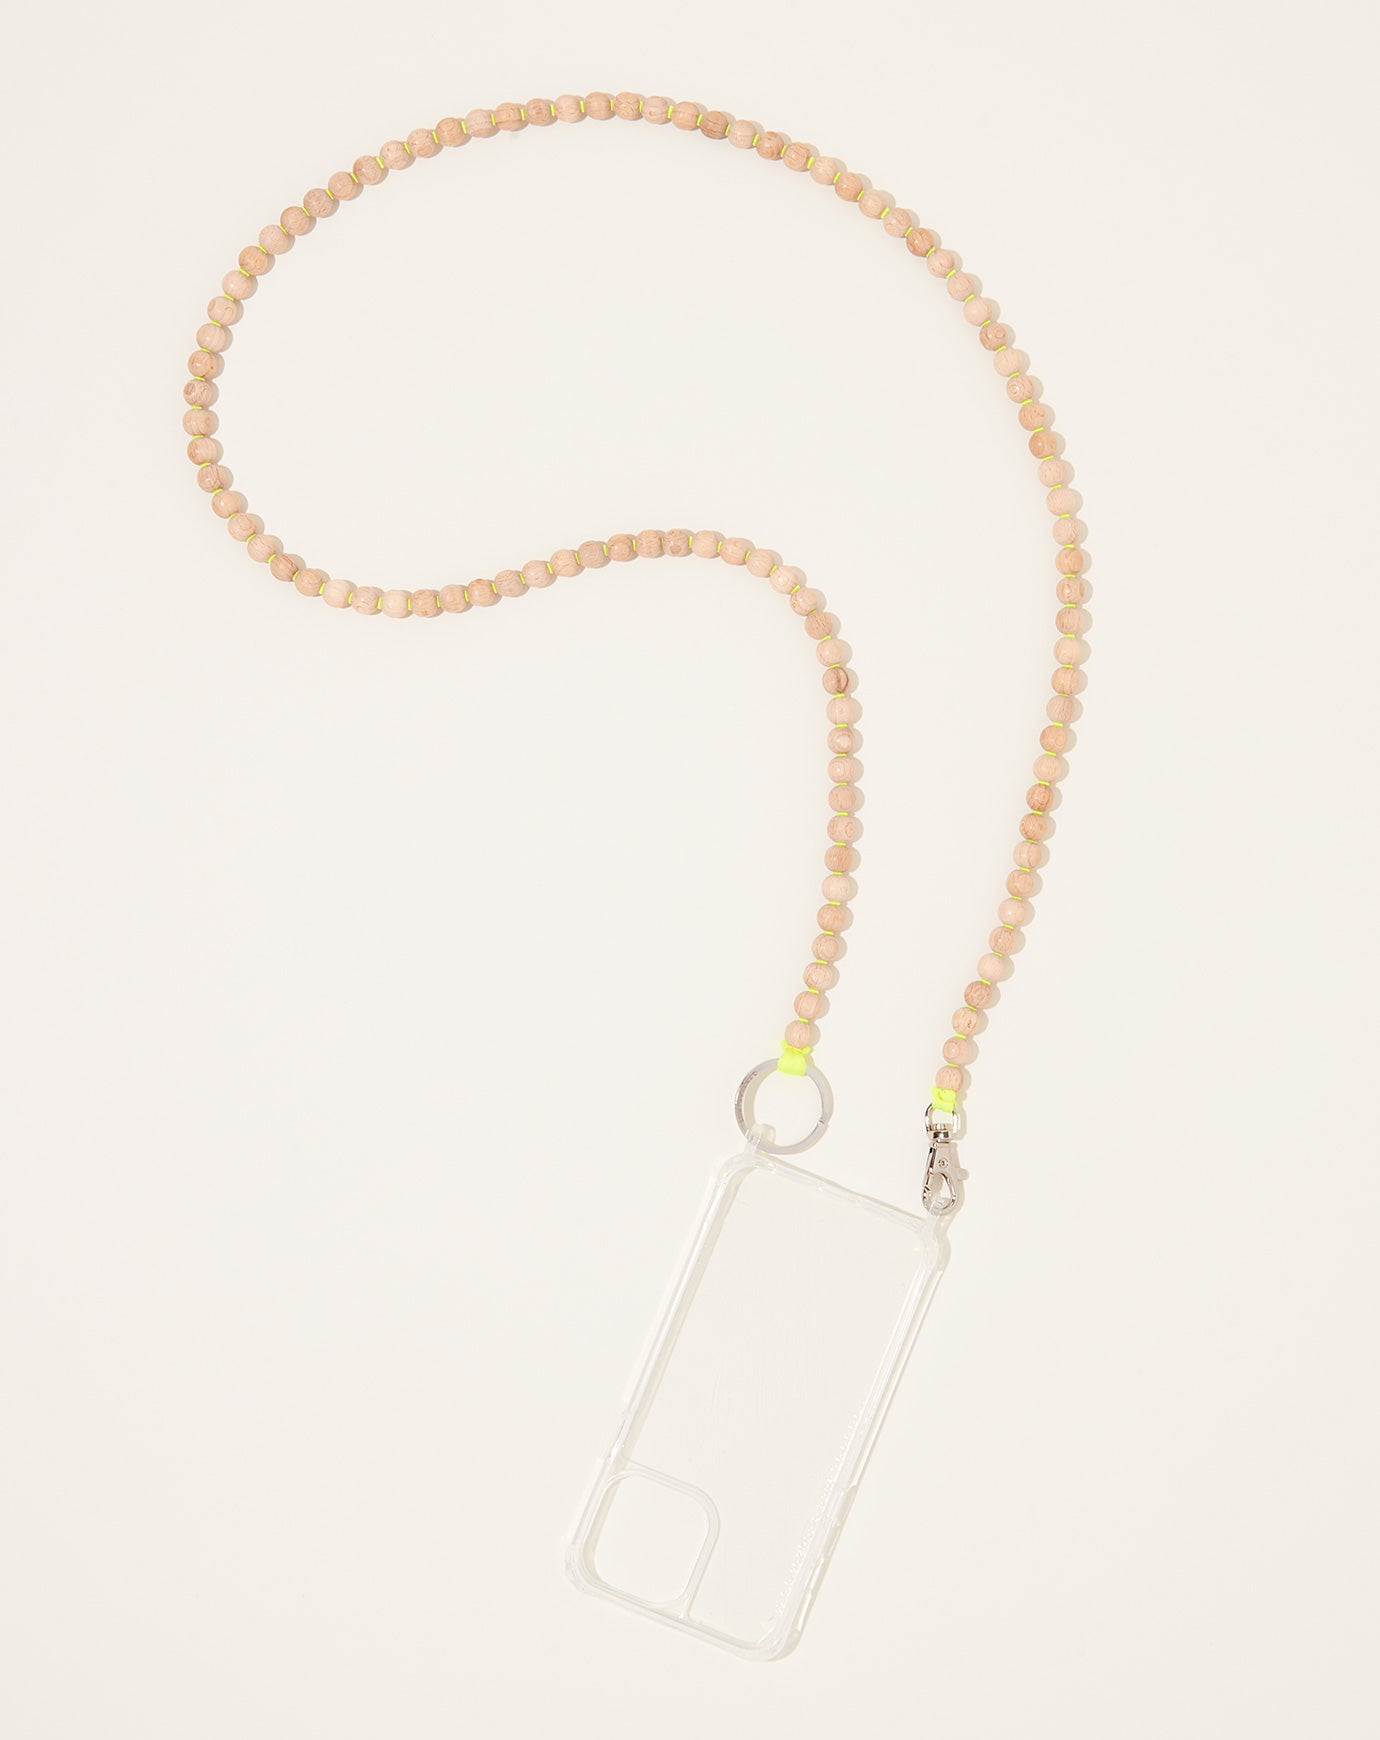 Ina Seifart Handykette iPhone Necklace in Natural on Neon Yellow